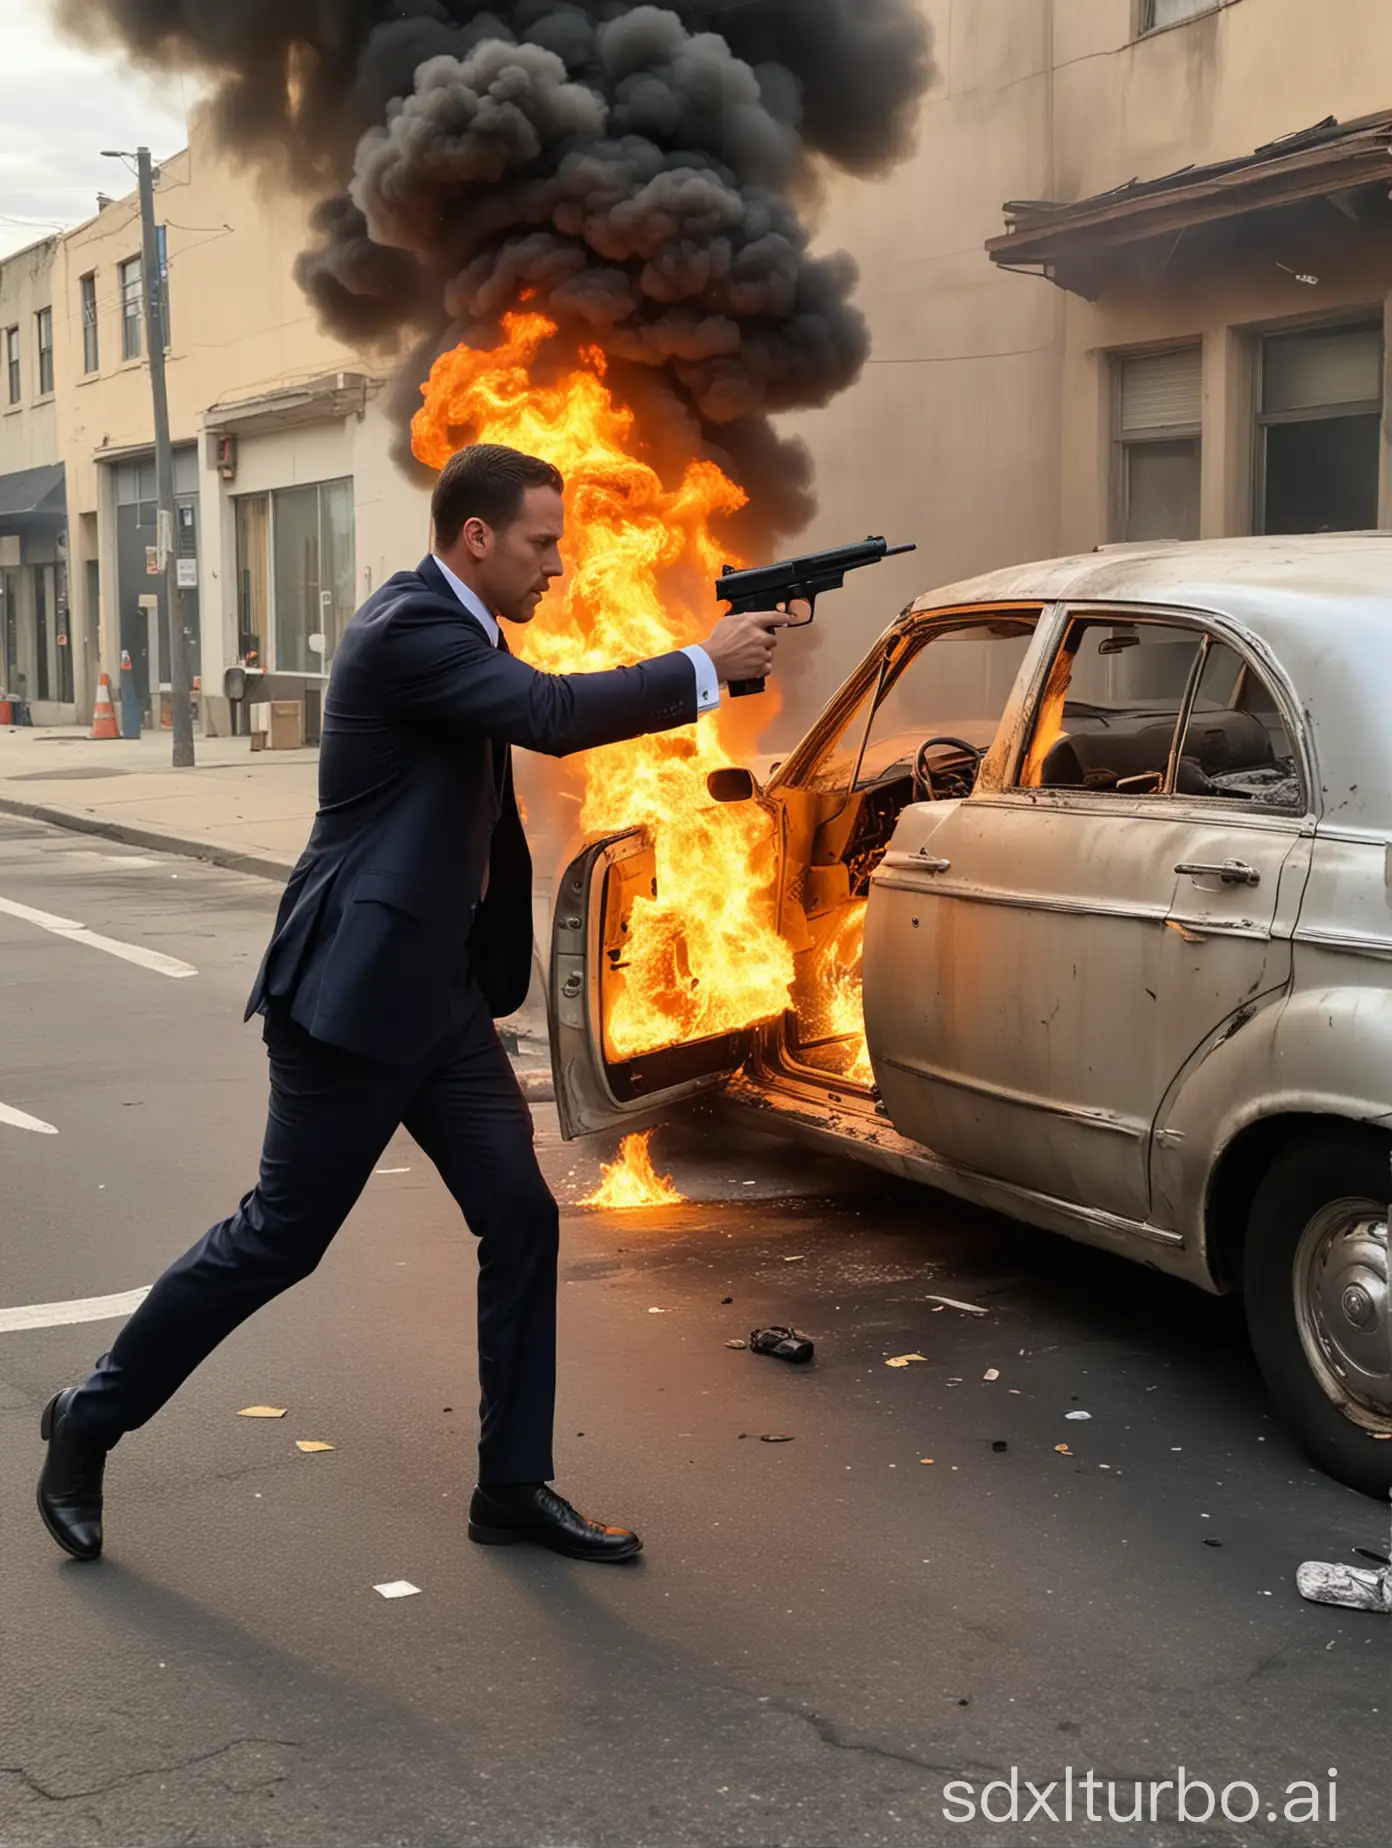 Man-Exiting-Car-with-Weapon-in-Front-of-Burning-Building